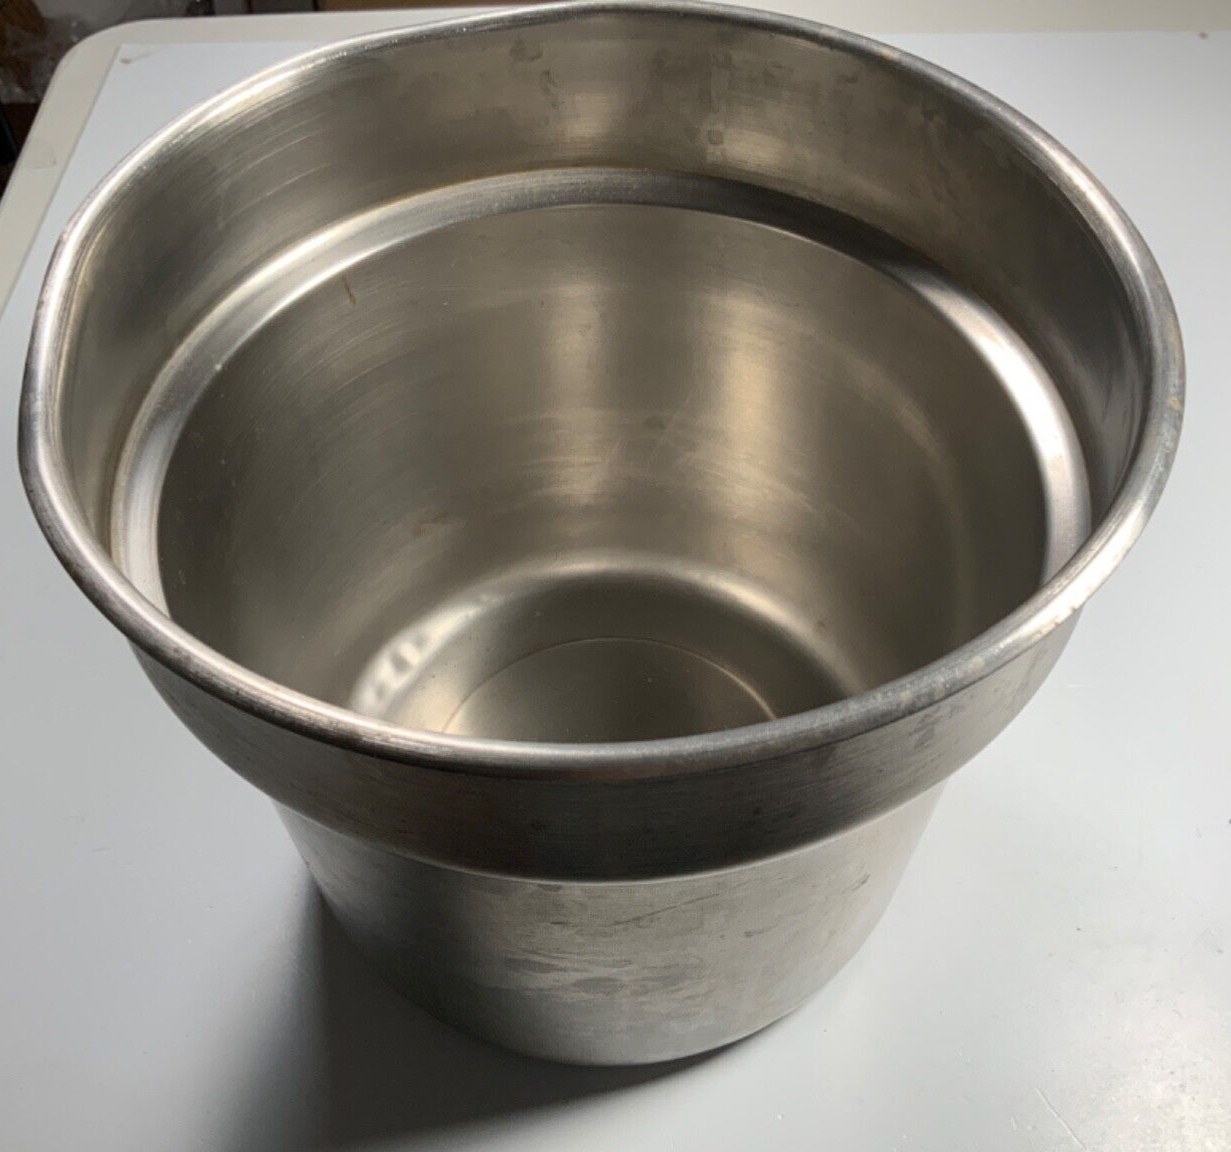 STAINLESS STEEL INSET PAN 7 QT USA NSF T304 - $30.00